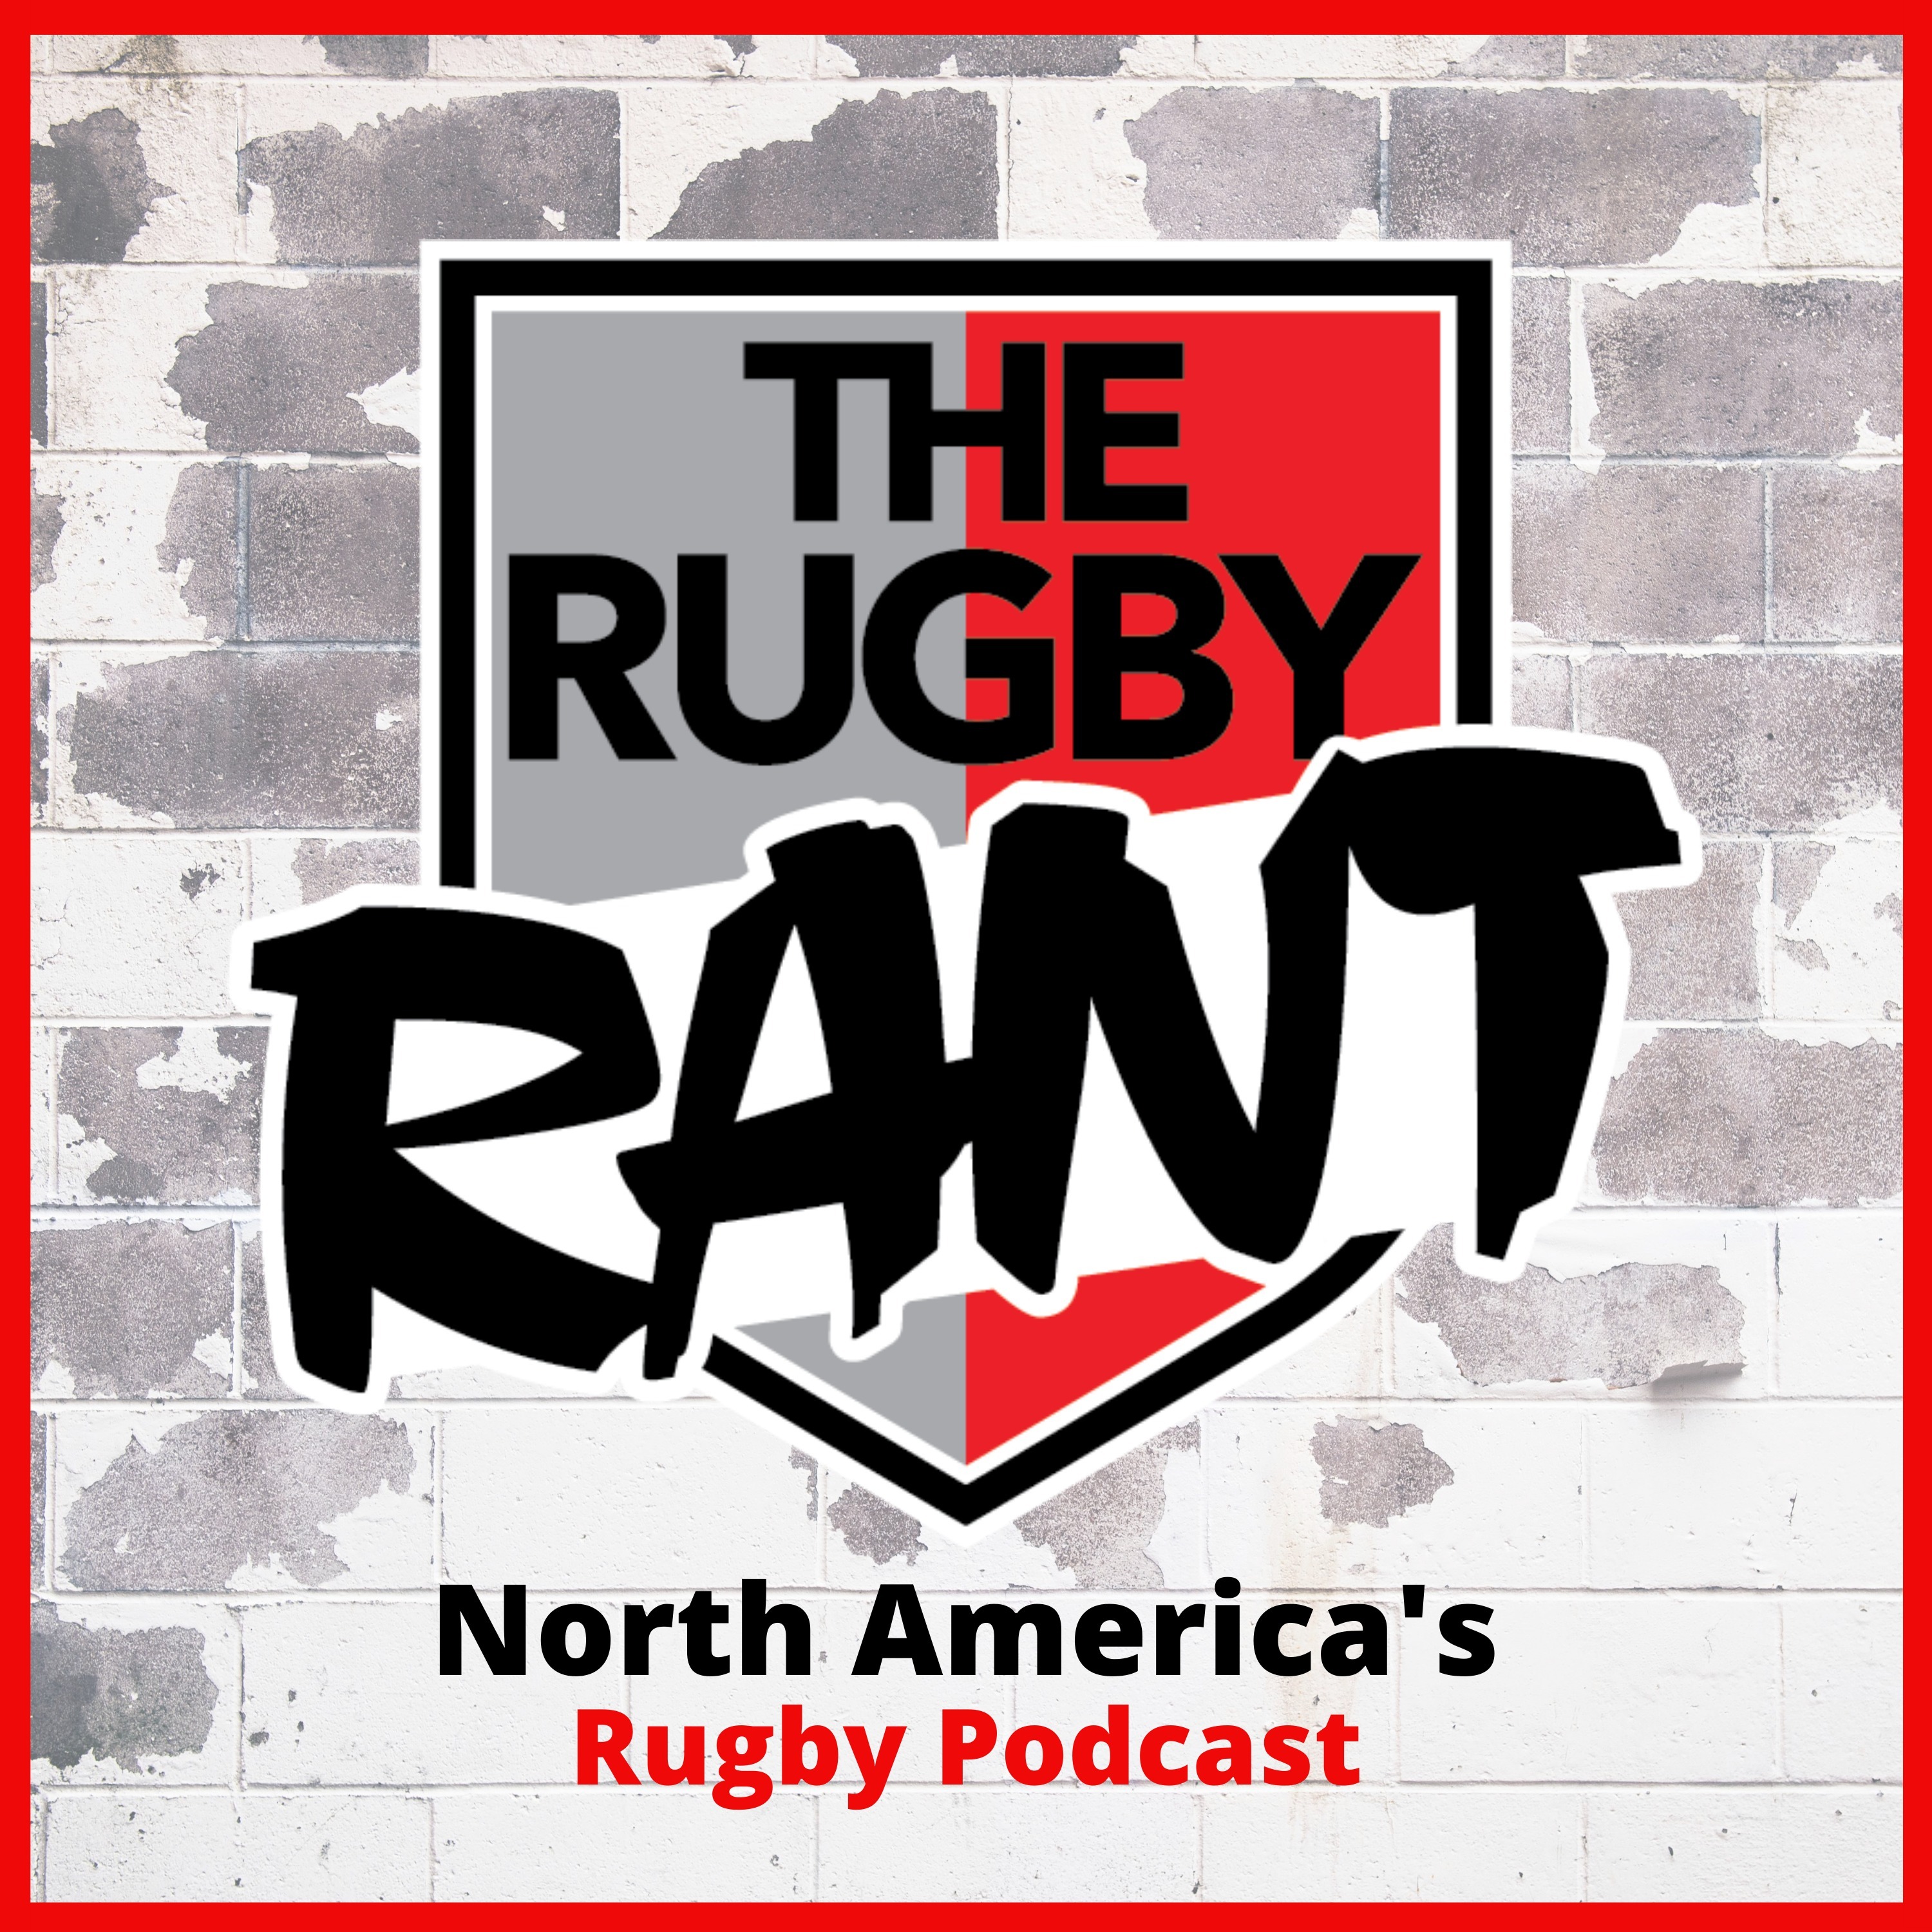 The Rugby Rant - Run, Pass or Kick with Kyle Ciquera